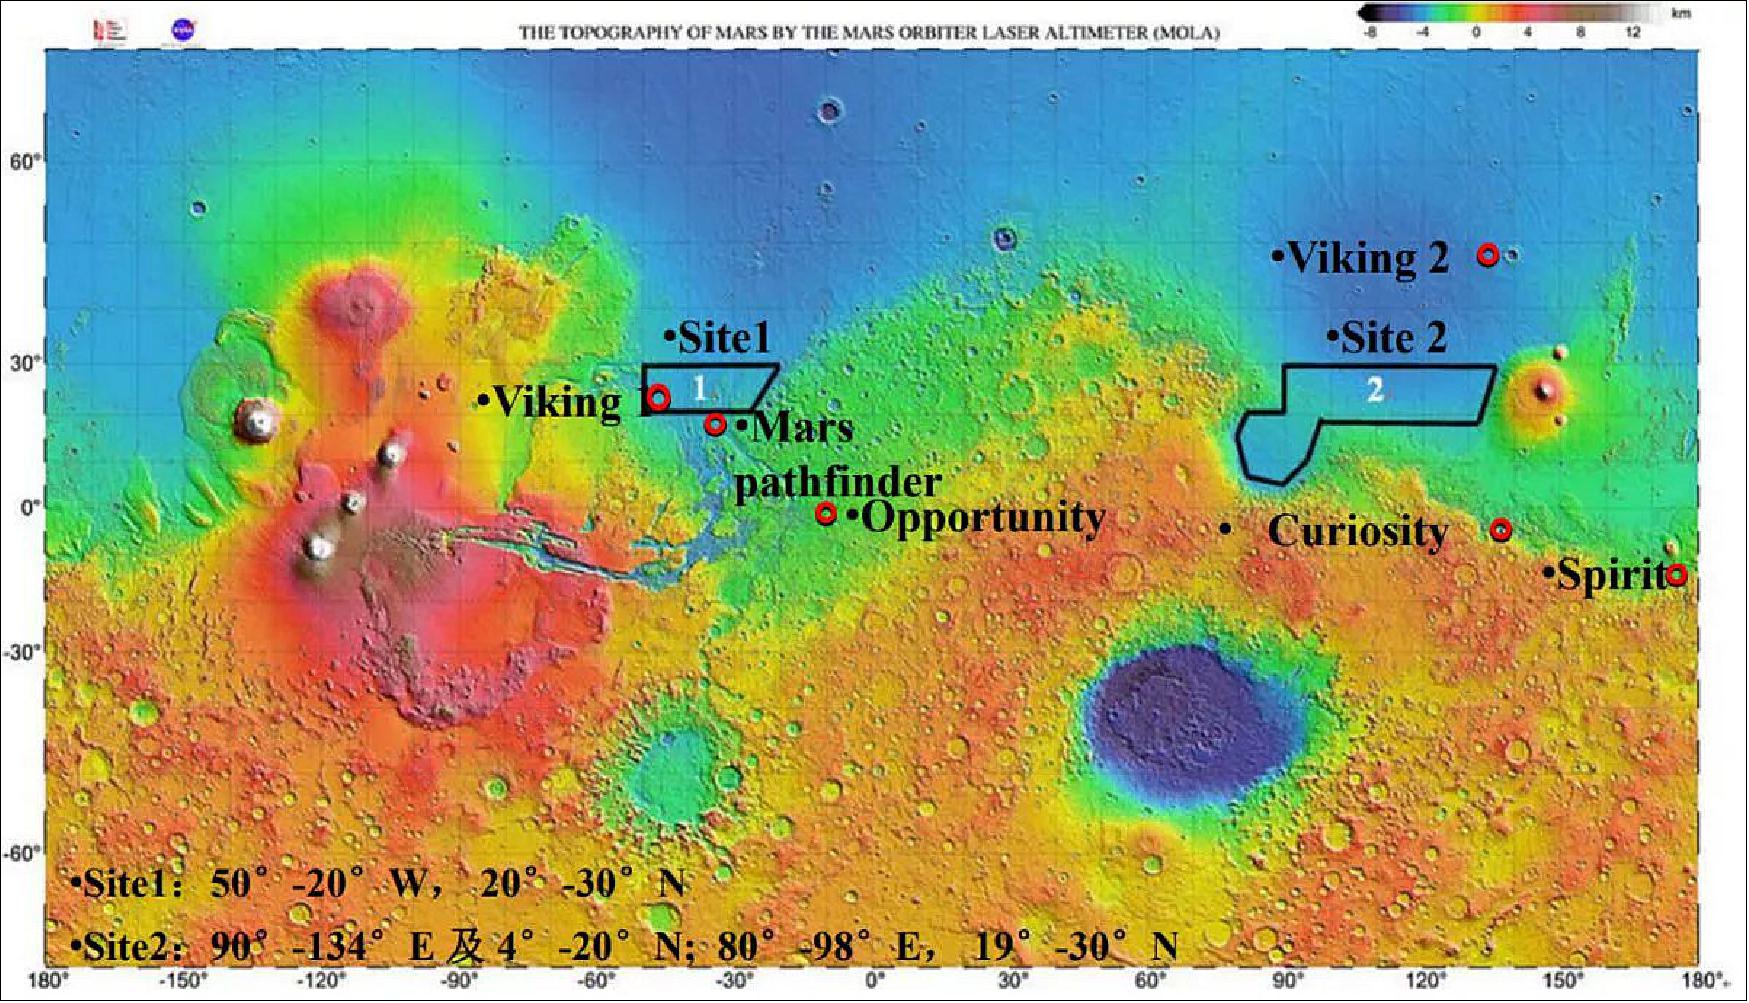 Figure 8: China Mars 2020 rover landing sites Map indicating two preliminary landing areas for China's 2020 Mars rover presented at the sessions of COPUOS in Vienna, Austria in June 2018 (image credit: CNSA)